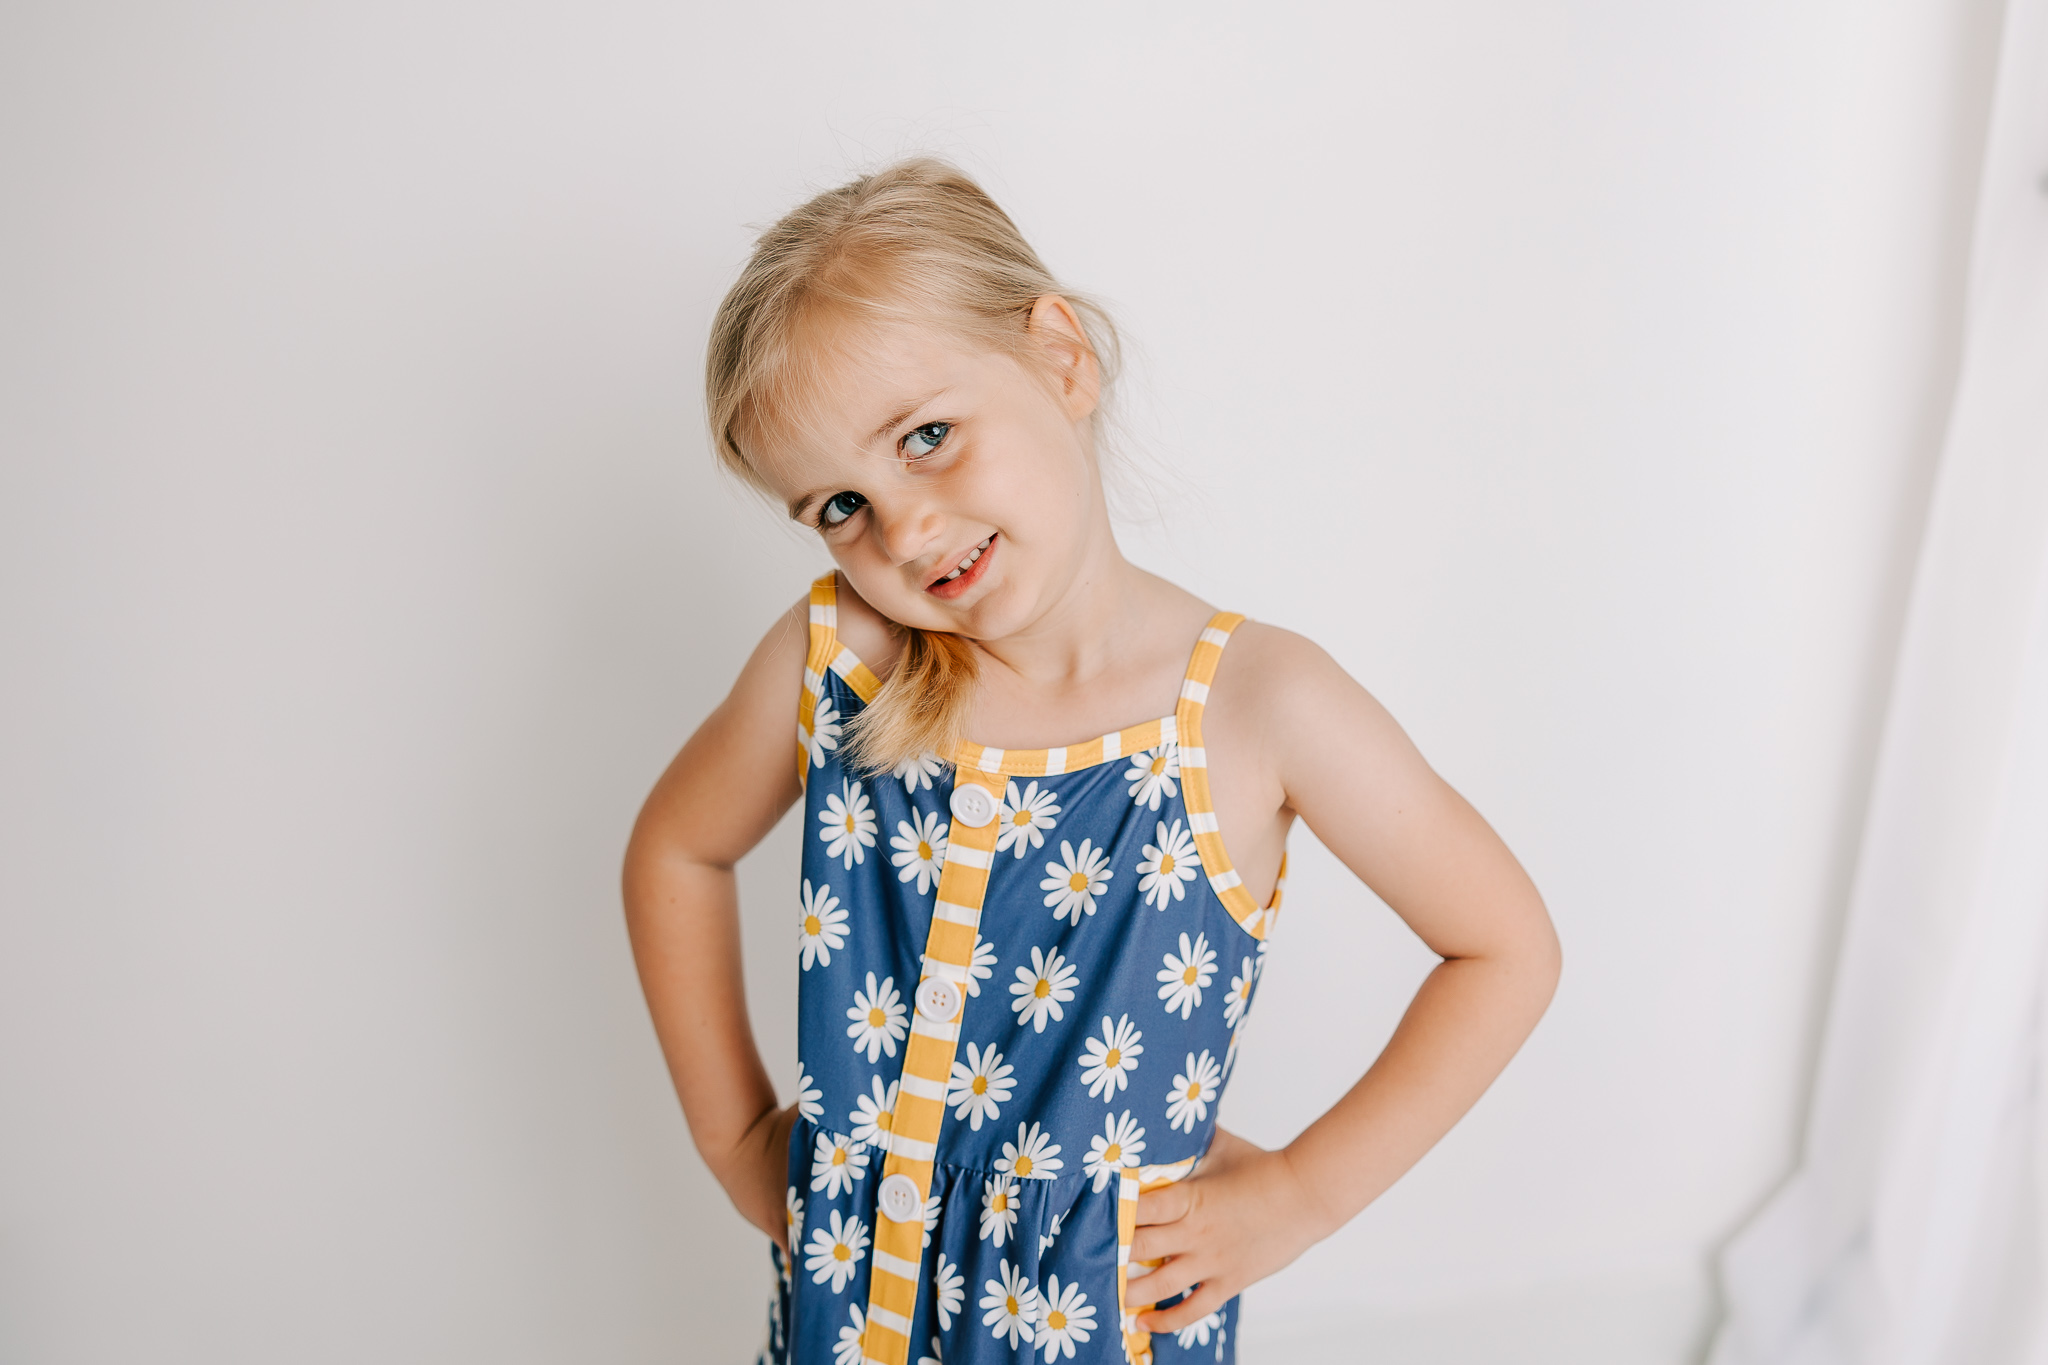 Sweet girl showing off her new dress she received from Sunshine Savvy Children's Boutique